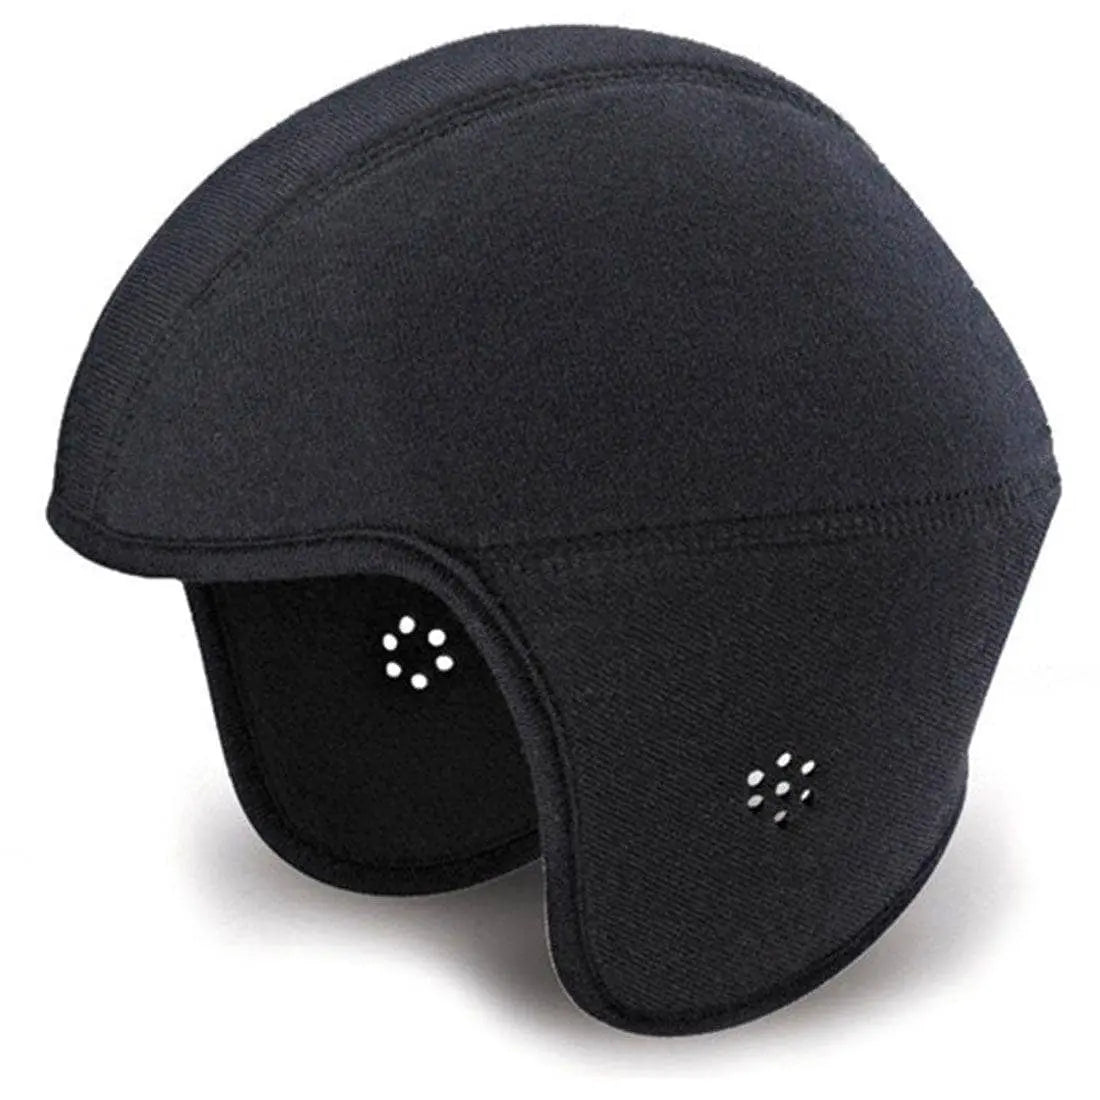 KASK - Internal Winter Padding - Becker Safety and Supply